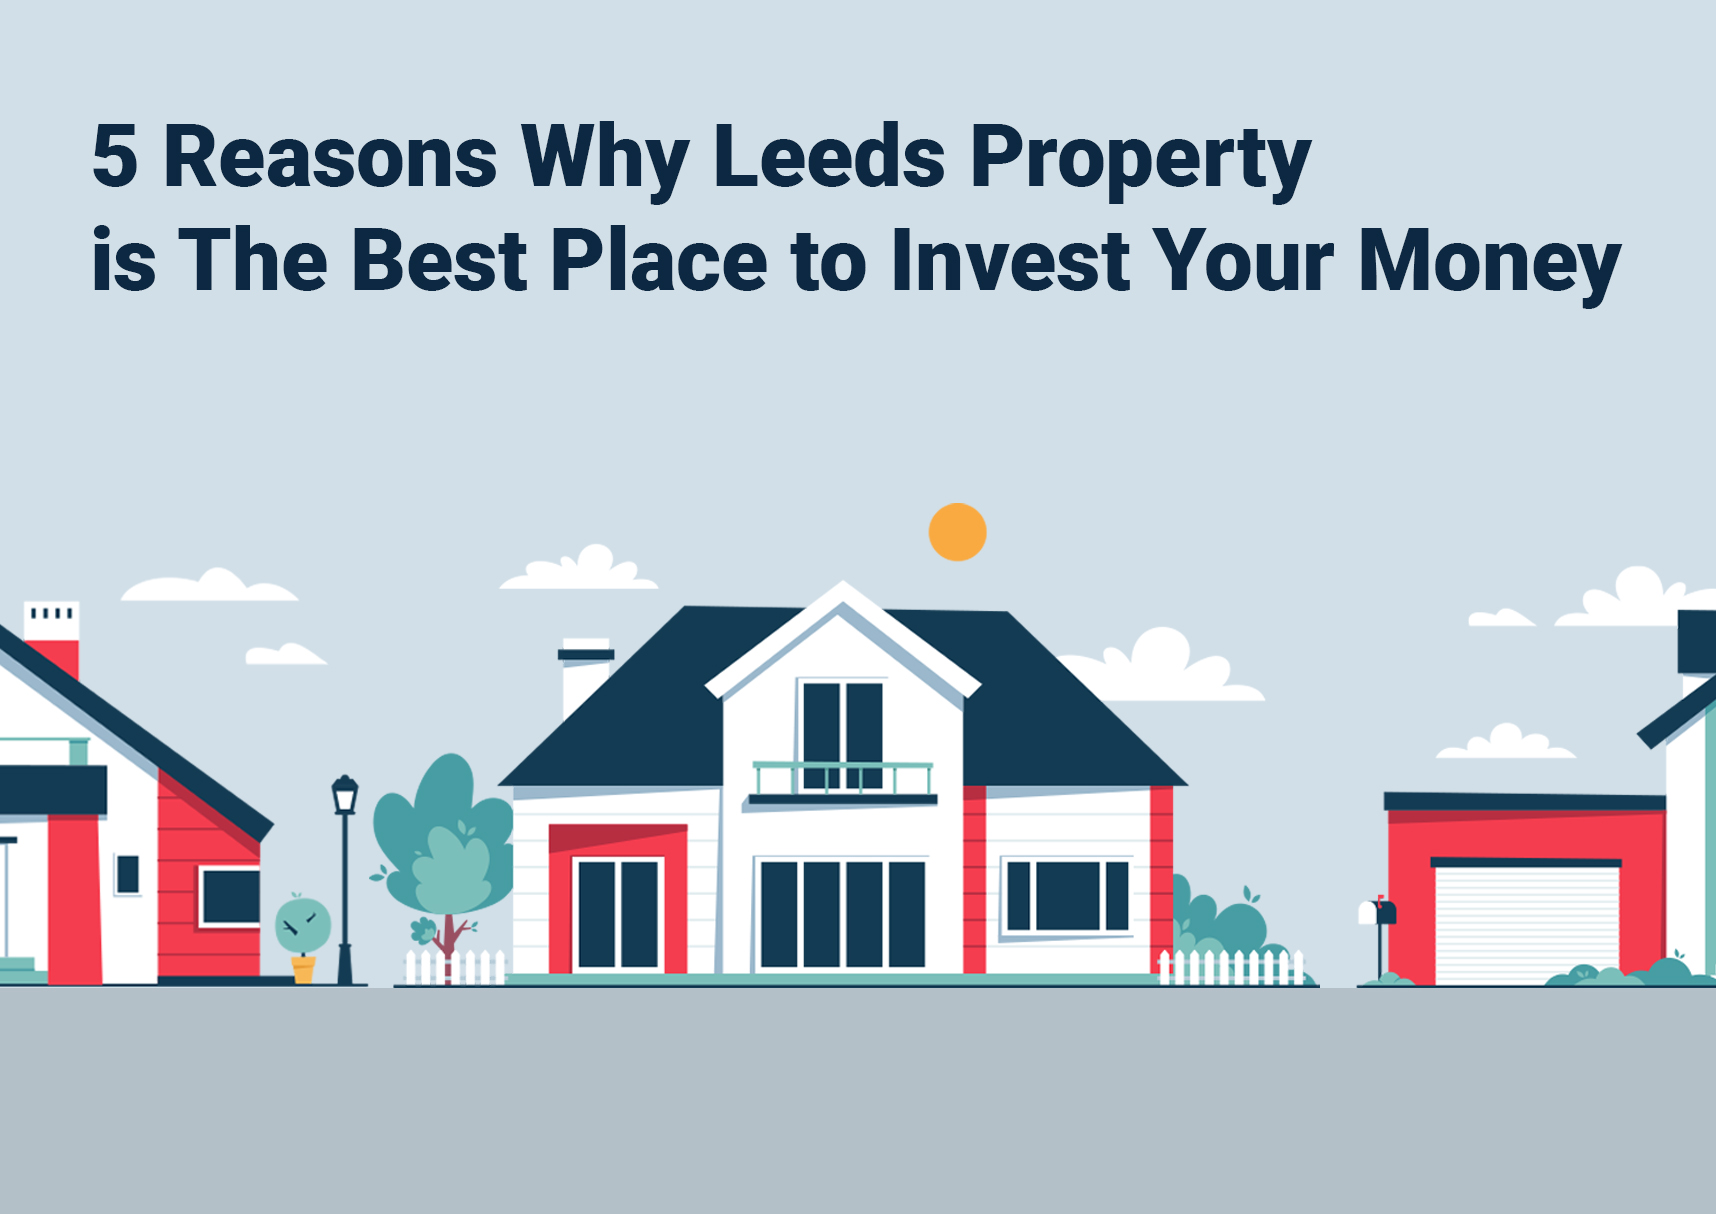 5 Reasons Why Leeds Property is The Best Place to Invest Your Money